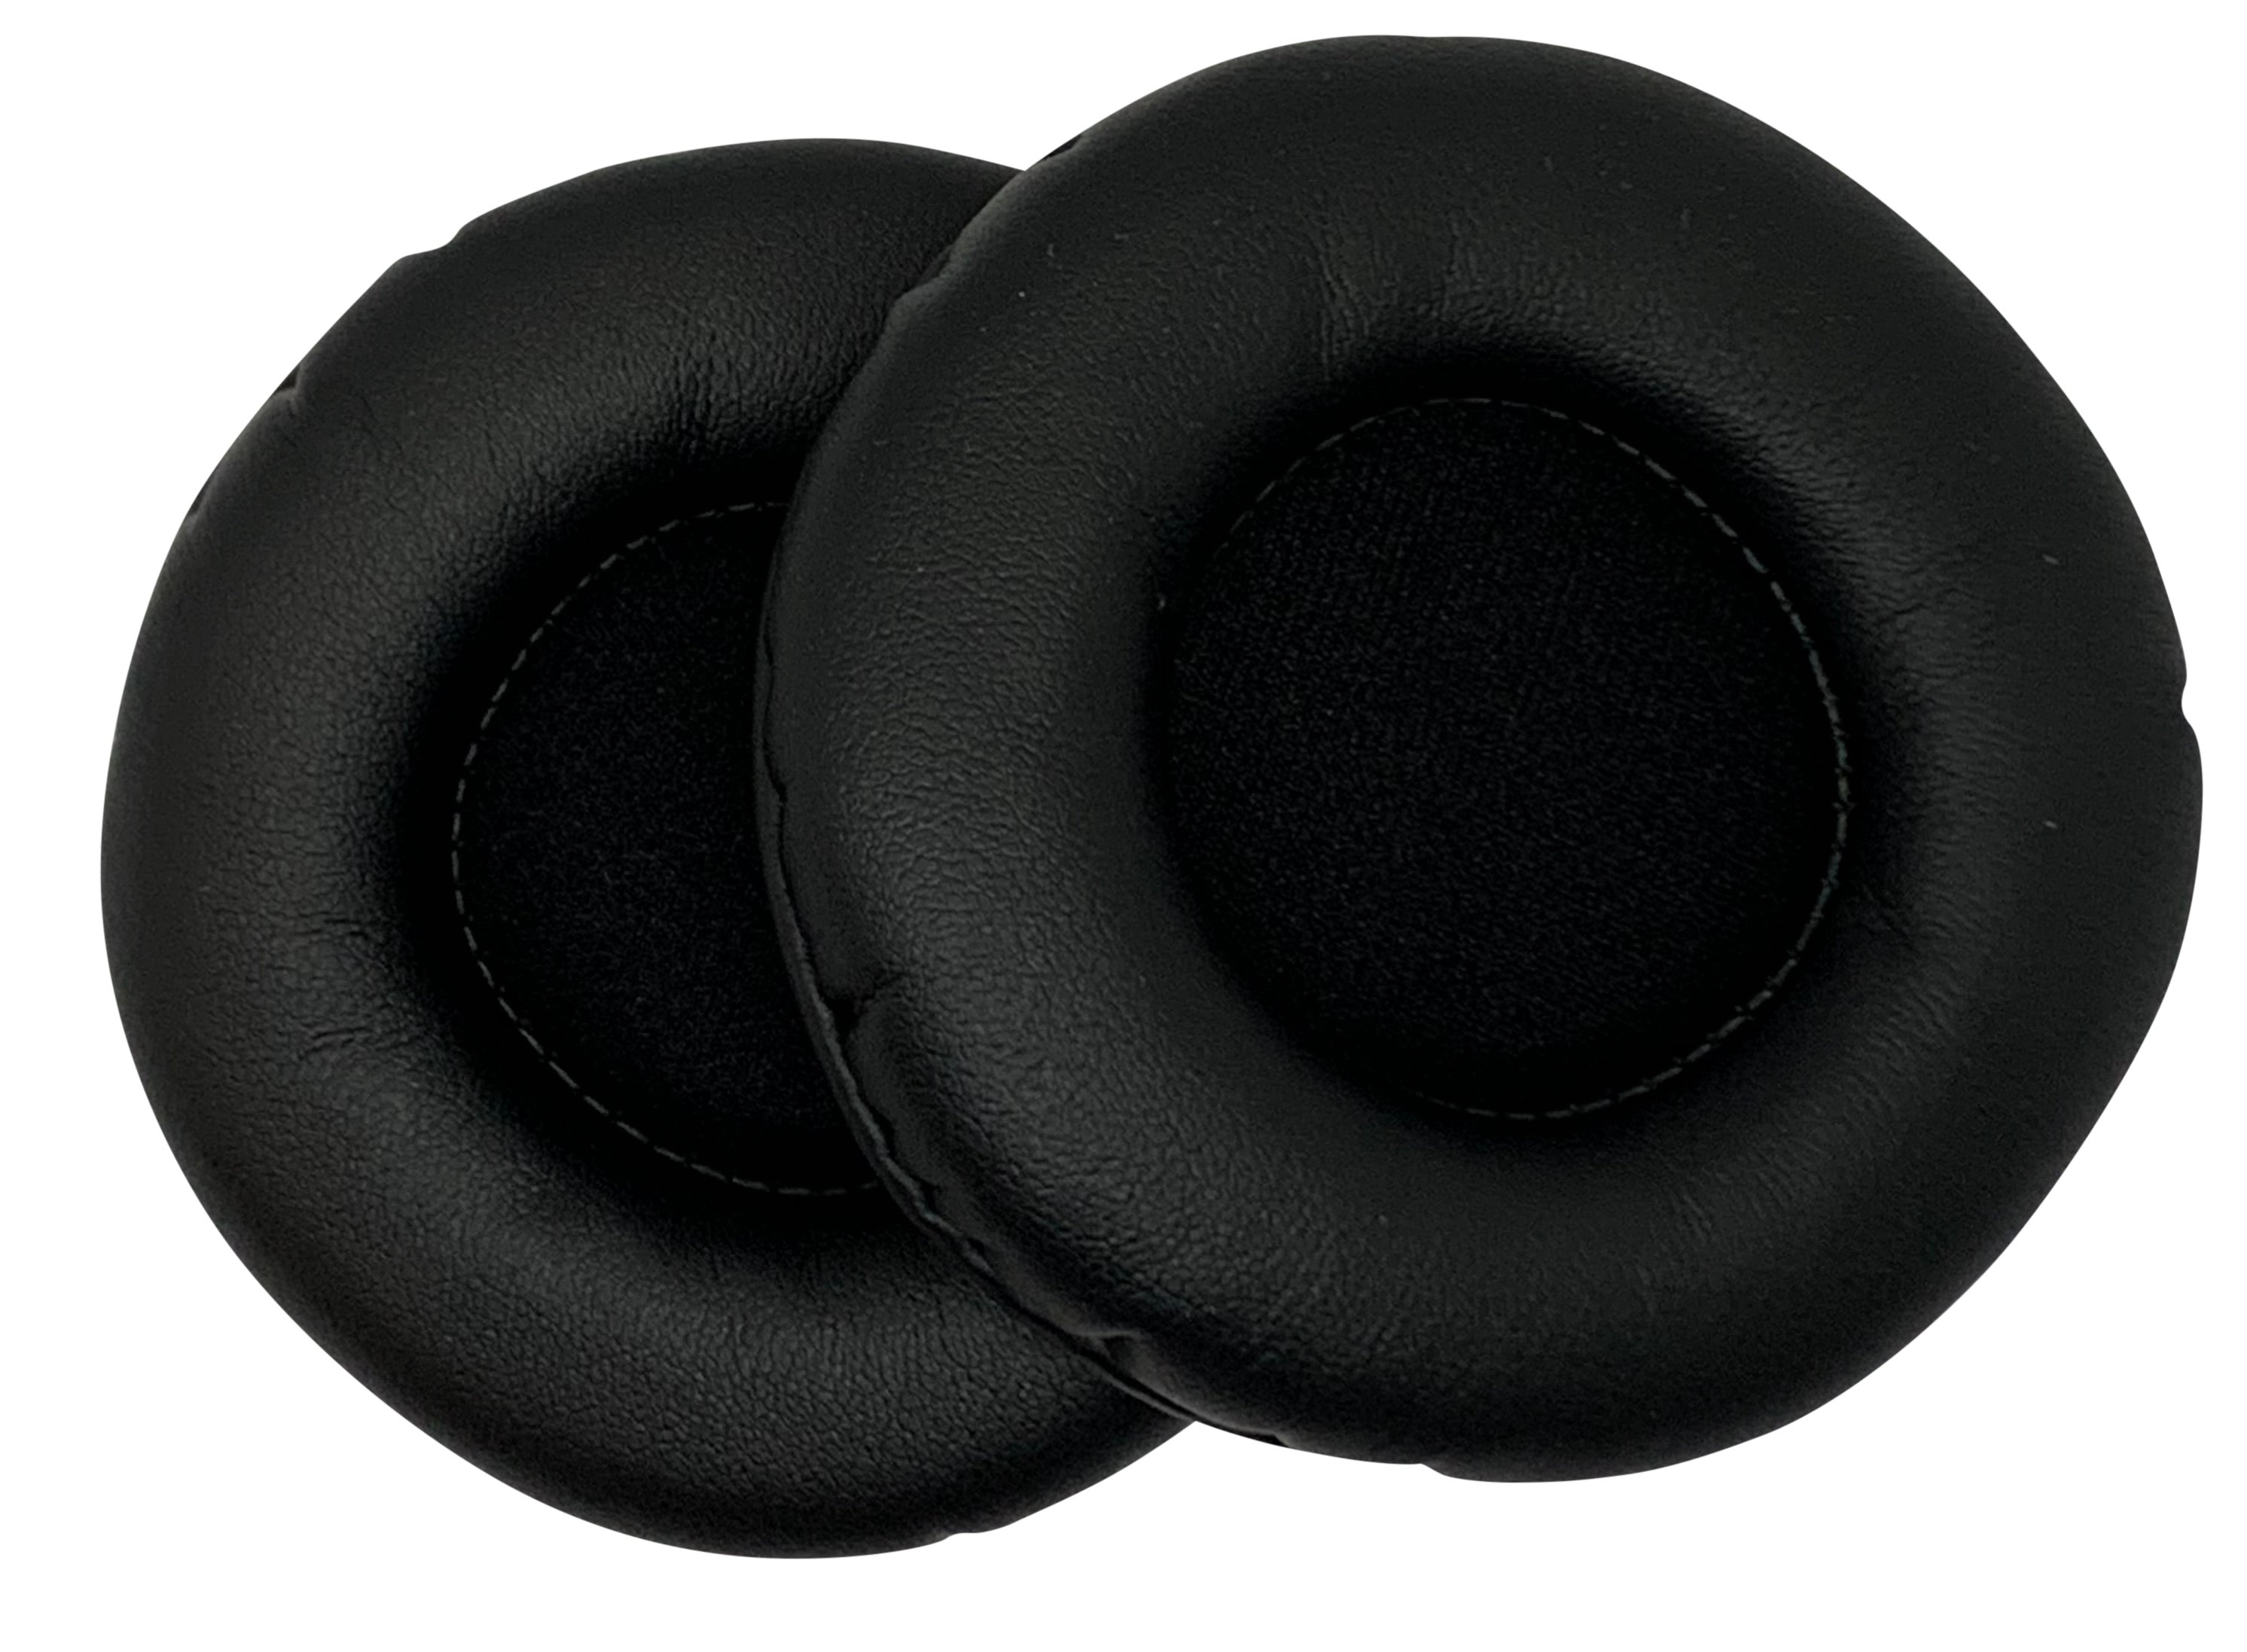 Premium CentralSound Replacement Ear Pad Cushions for Sony Headphones  MDR V55 MDR V500 MDR 7502 - CentralSound